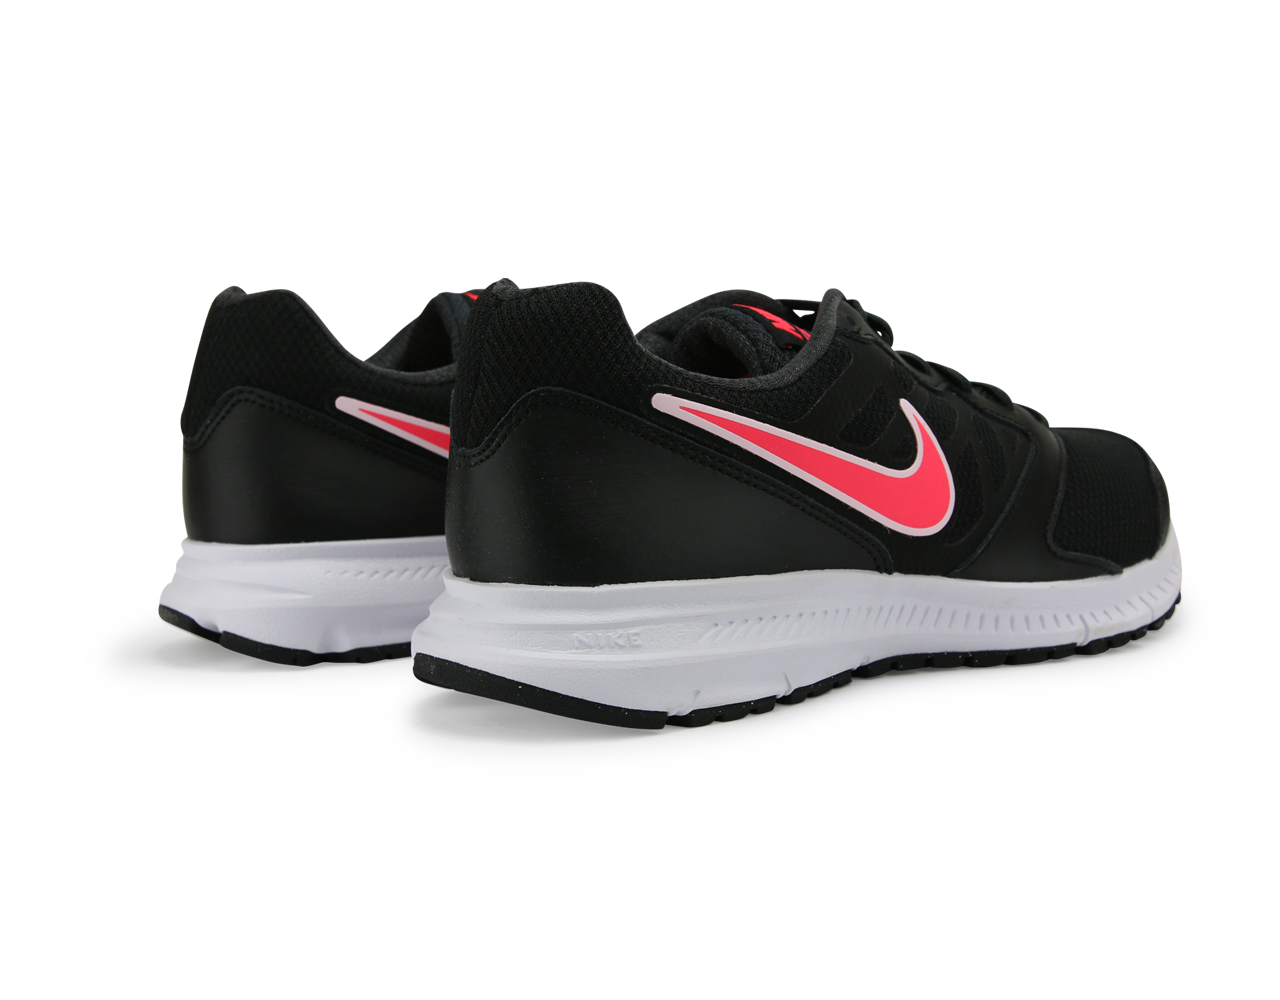 Nike Women's DownShifter 6 Running Shoes Black/Hyper Punch/Anthracite